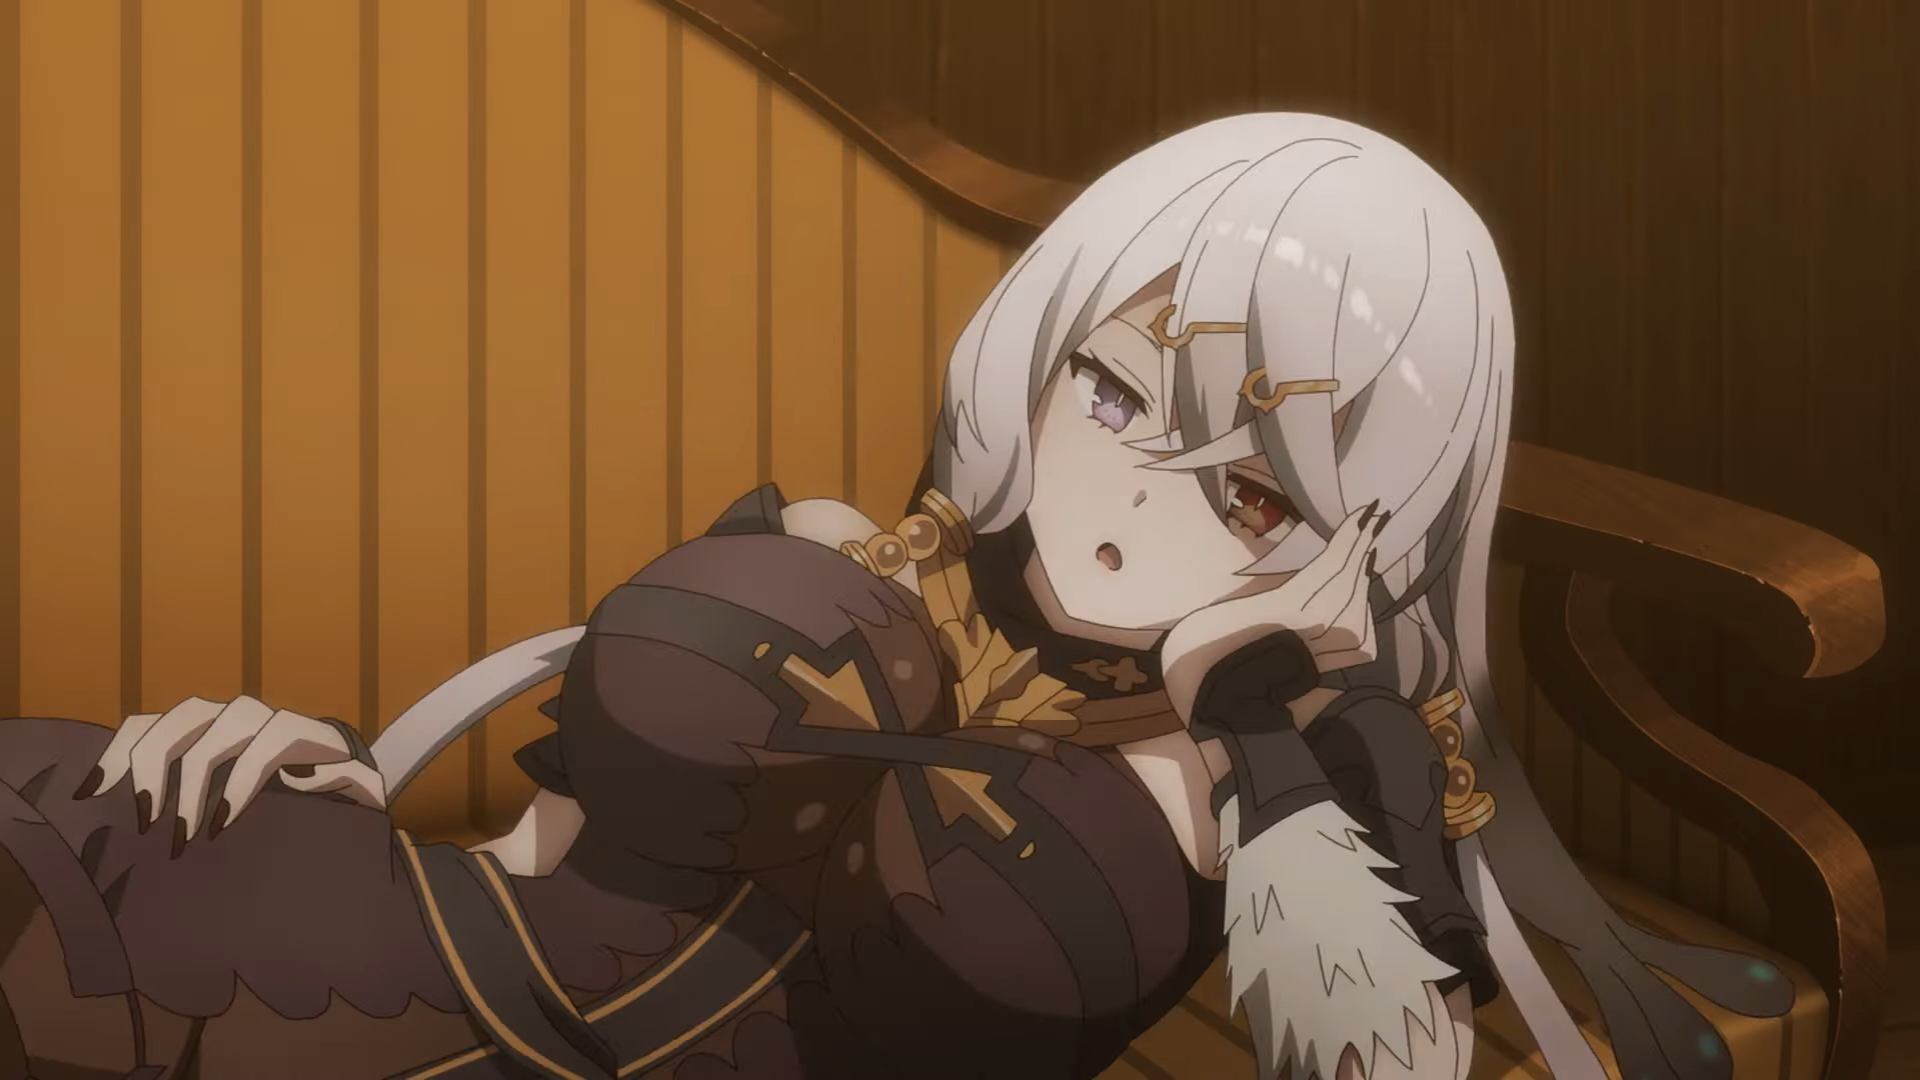 New Atelier Ryza Anime Trailer Highlights Party Member Lila Decyrus